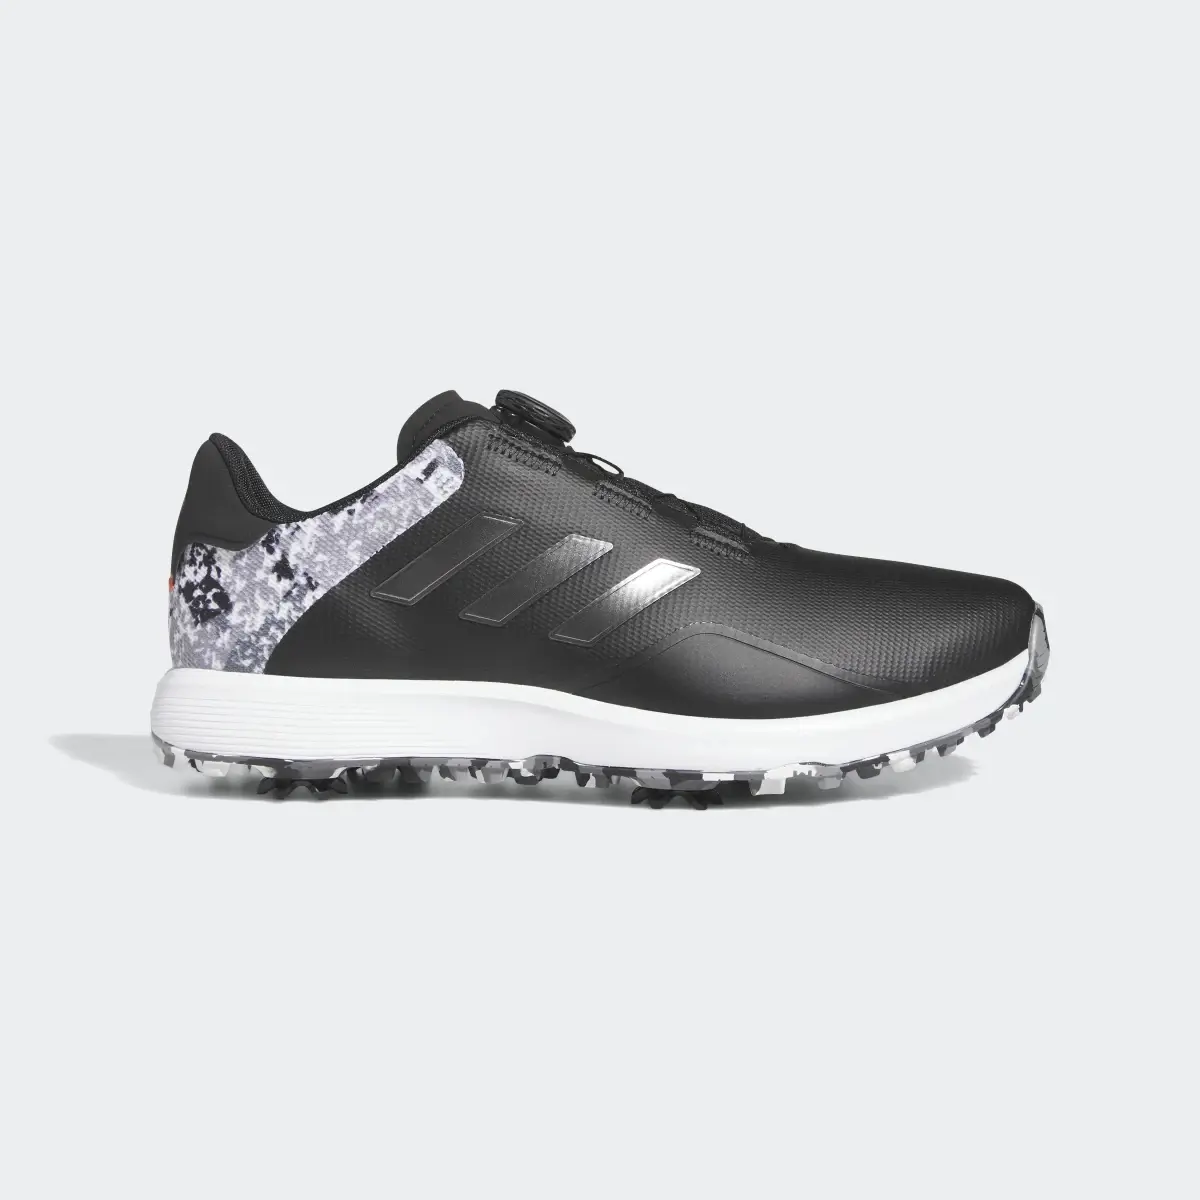 Adidas S2G BOA Wide Golf Shoes. 2